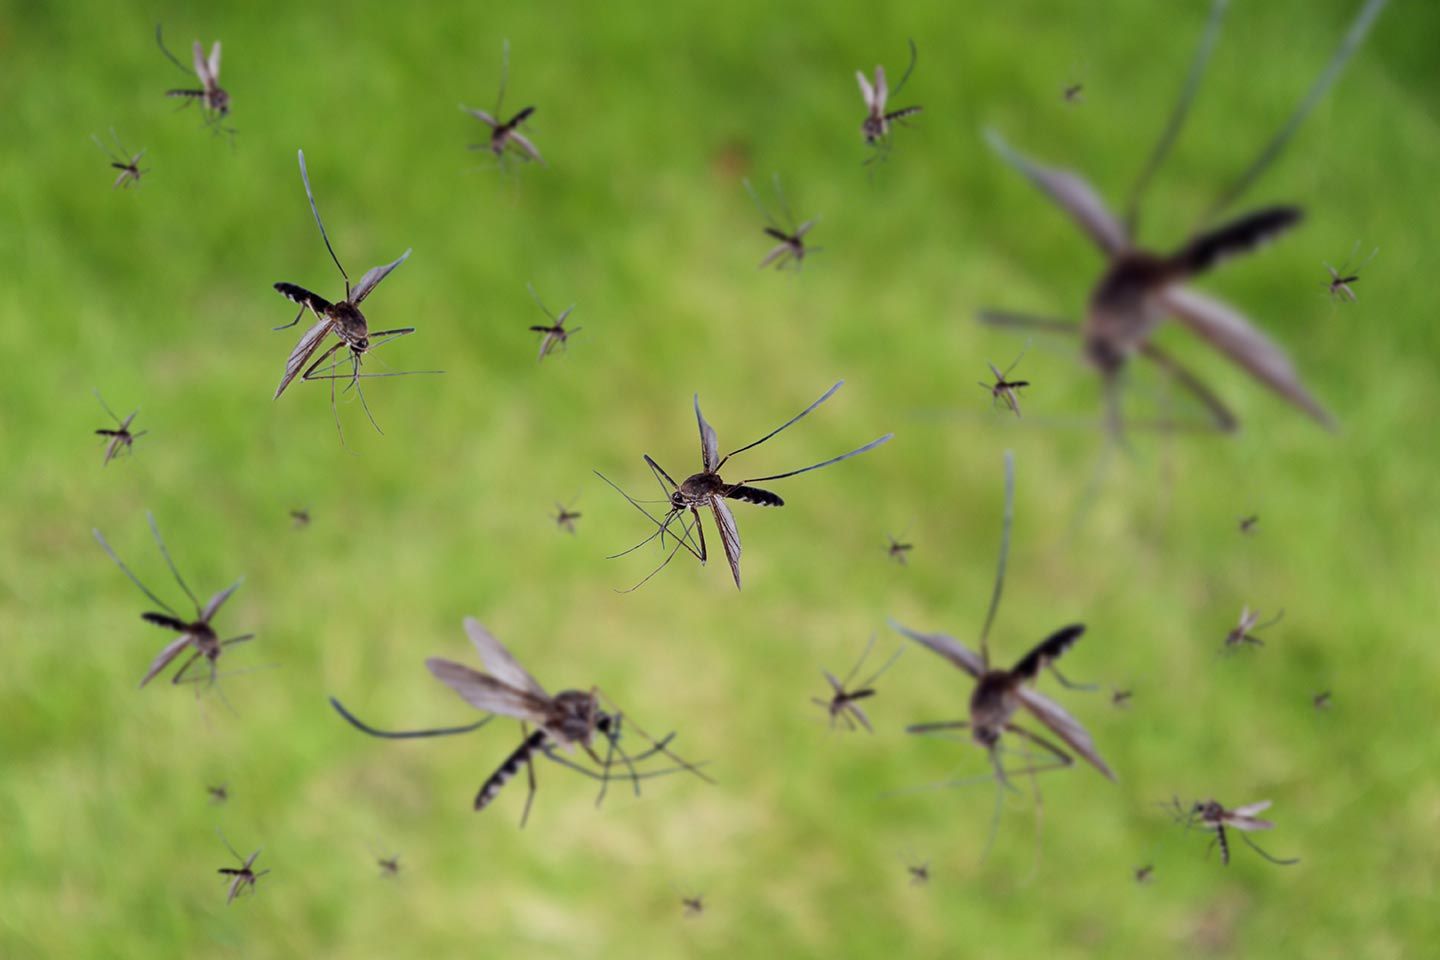 Pilgrim Pest Professionals is a backyard mosquito control company that offers mosquito treatment, mosquito repellent, and mosquito spraying services.